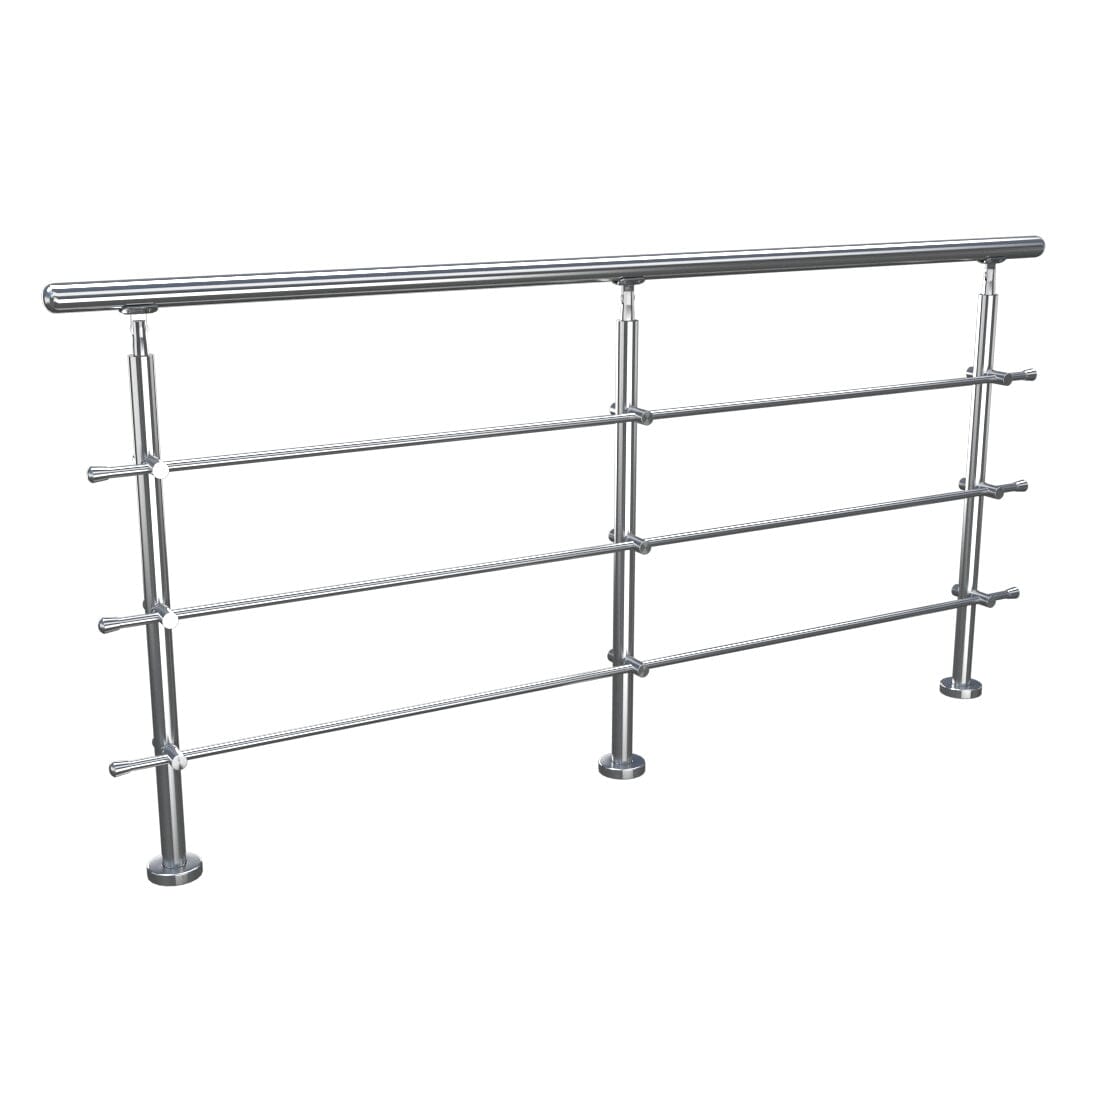 Silver Floor Mount Stainless Steel Handrail for Slopes and Stairs Garden Fences & Wall Hedges Living and Home 